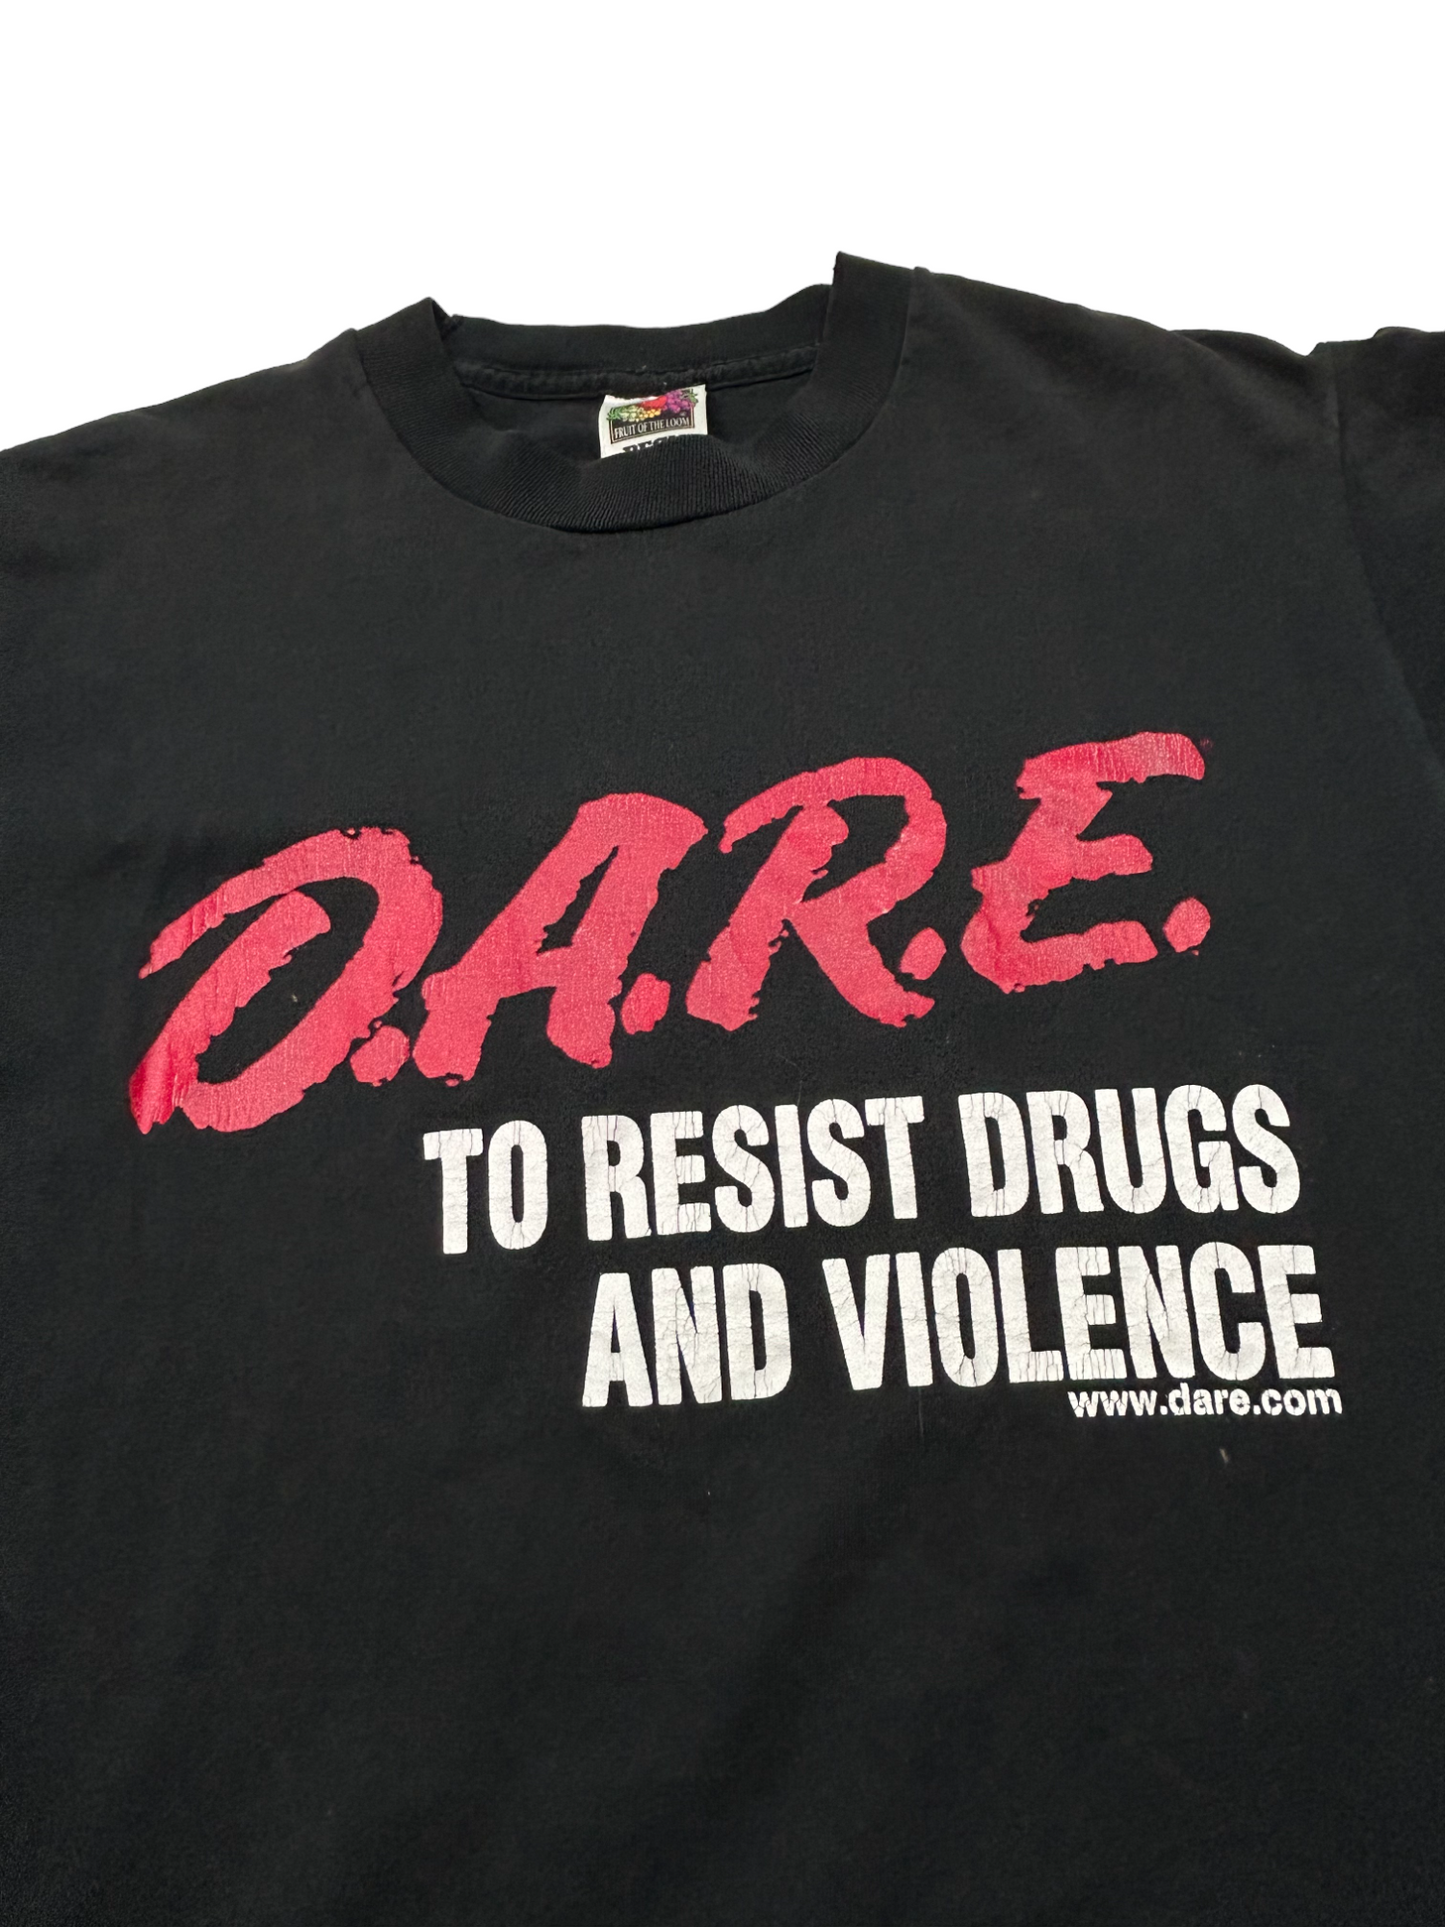 Resist Drugs and Violence T-Shirt